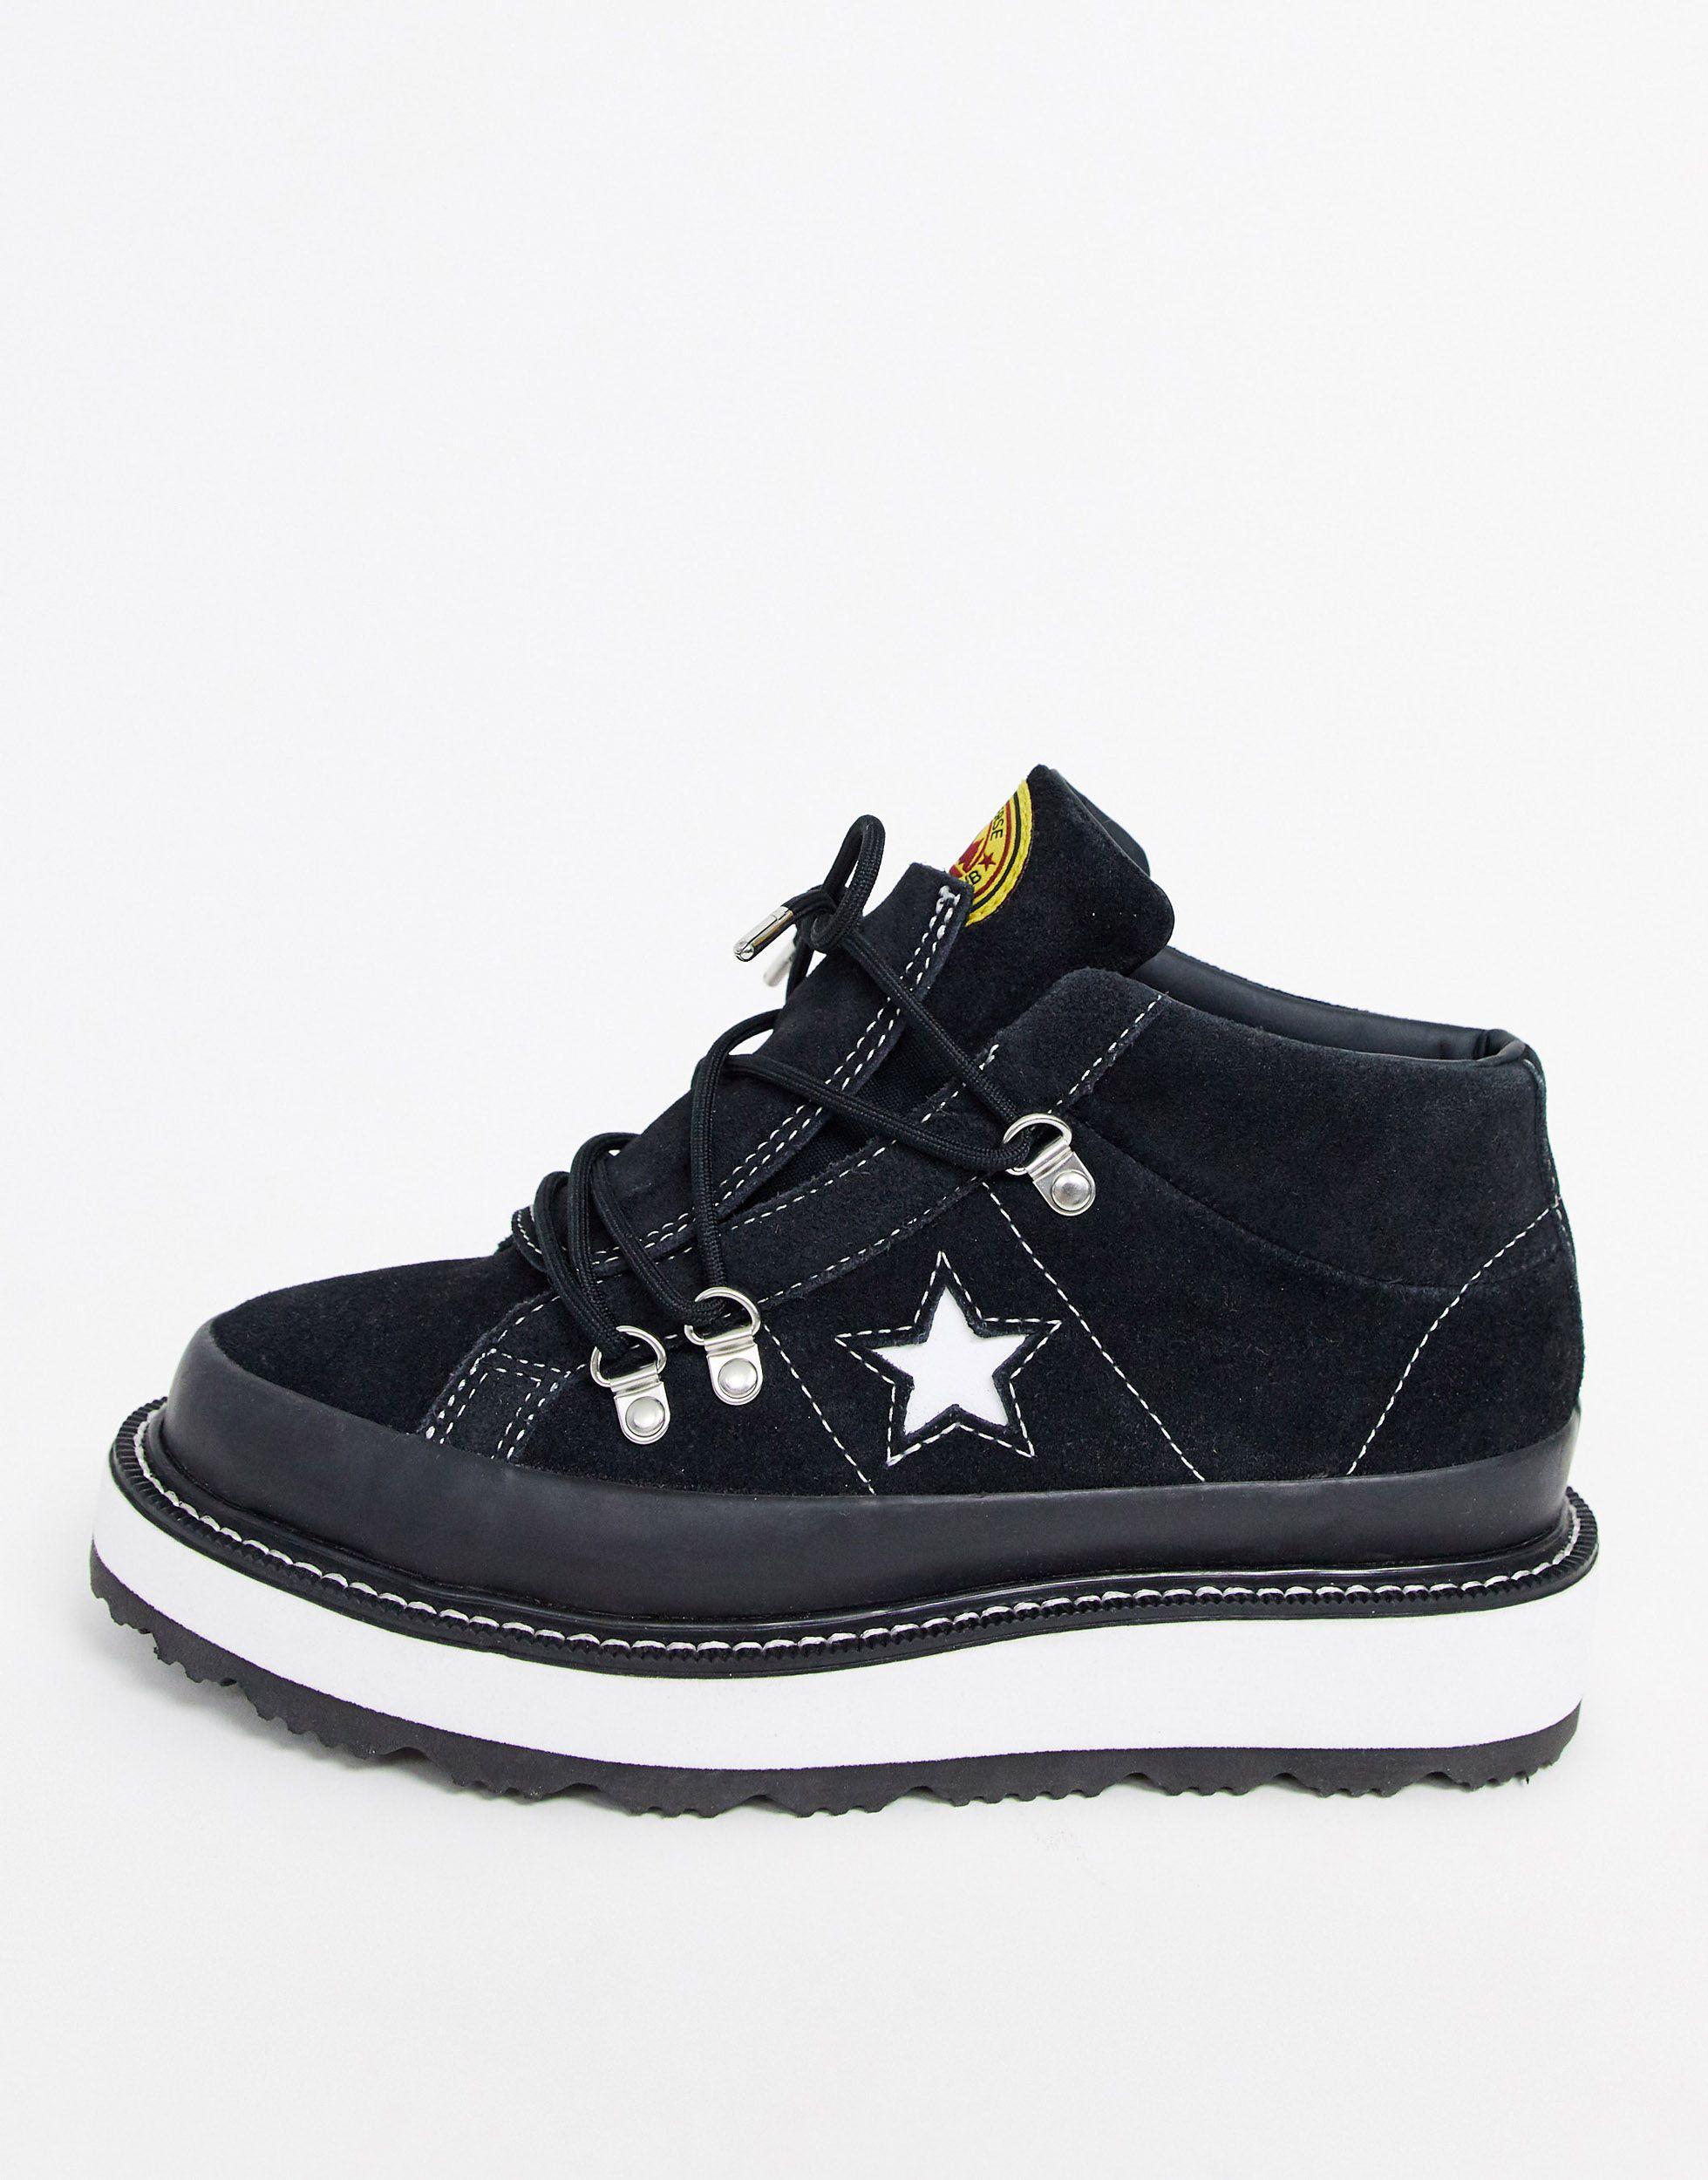 Converse One Star Hiker Boots in Black | Lyst